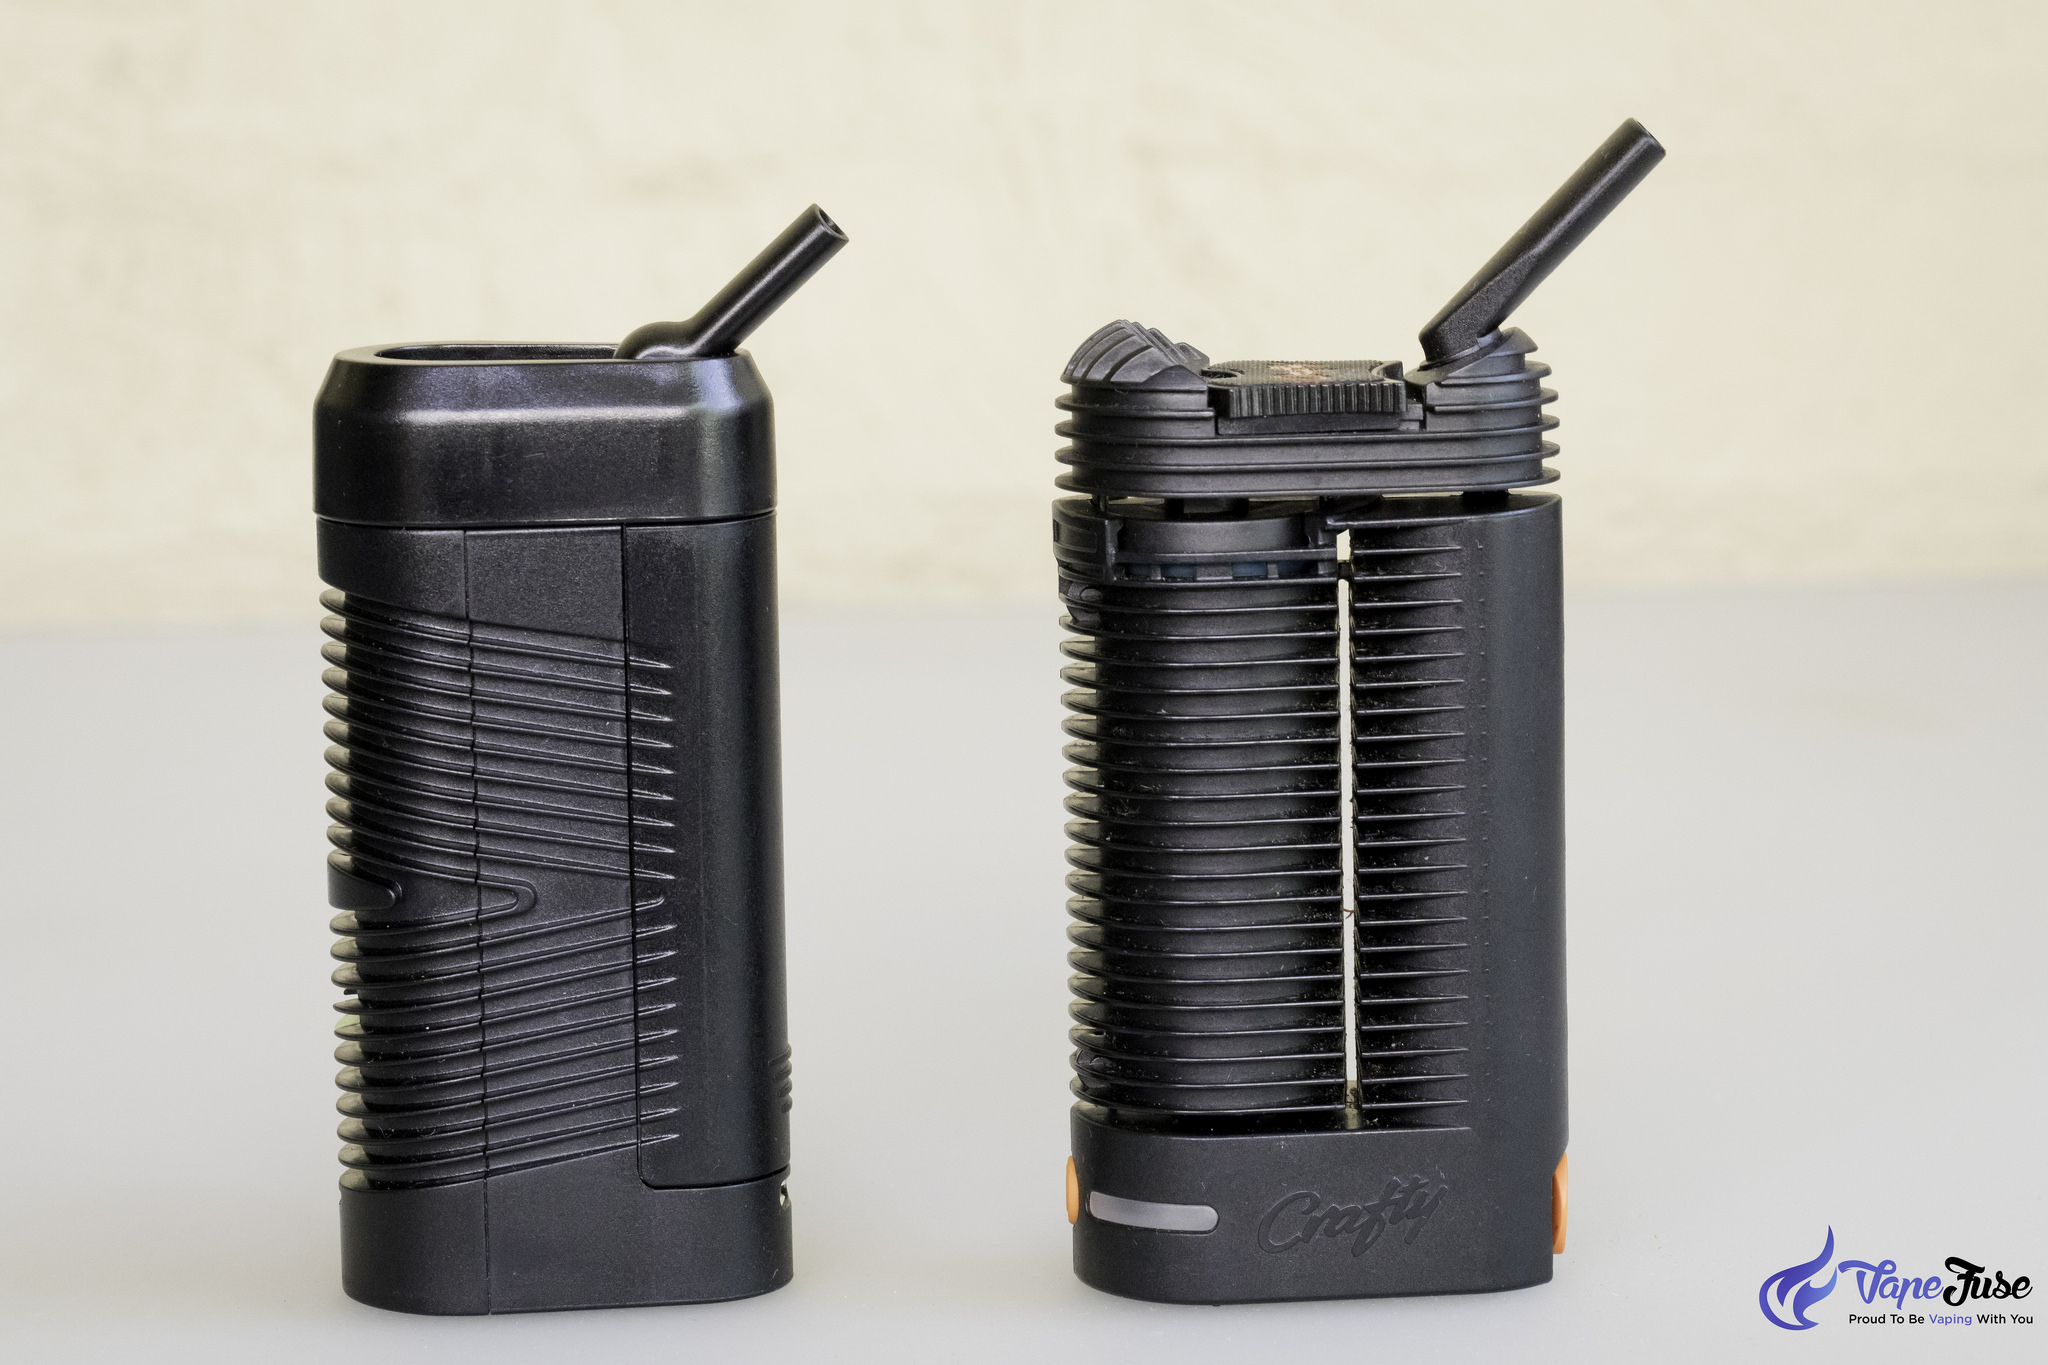 Vivant Alternate and Storz and Bickel Crafty vaporizers